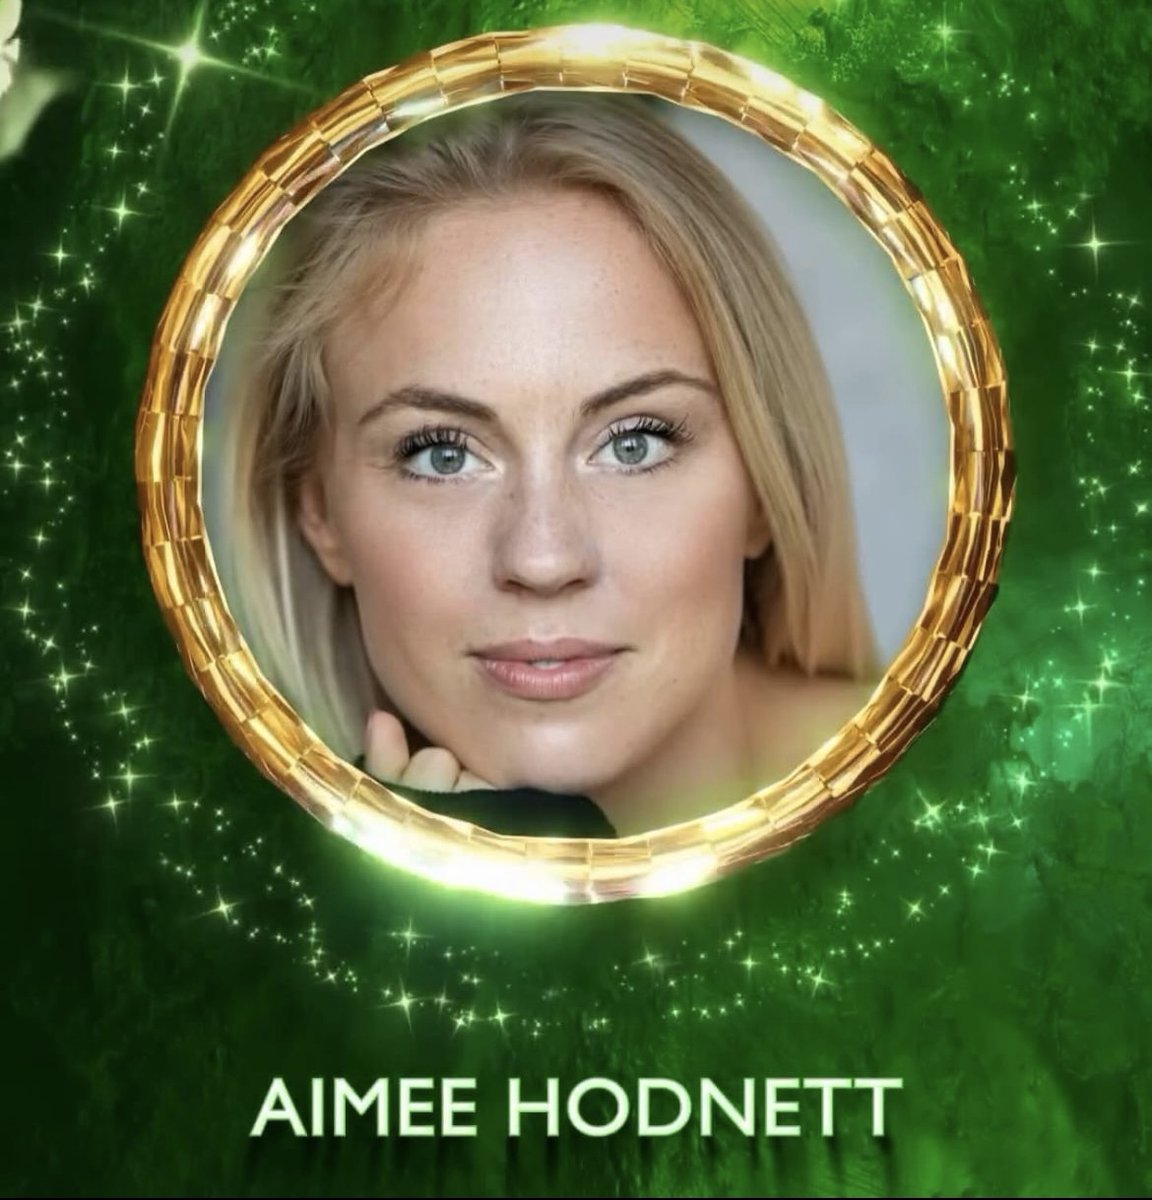 Sending all of our love to @aimee_hodnett and the rest of the cast and crew for their opening performance of @WickedUK at London's @ApolloVictoria tonight! #WickedUK #AimeeHodnett #ApolloVictoria